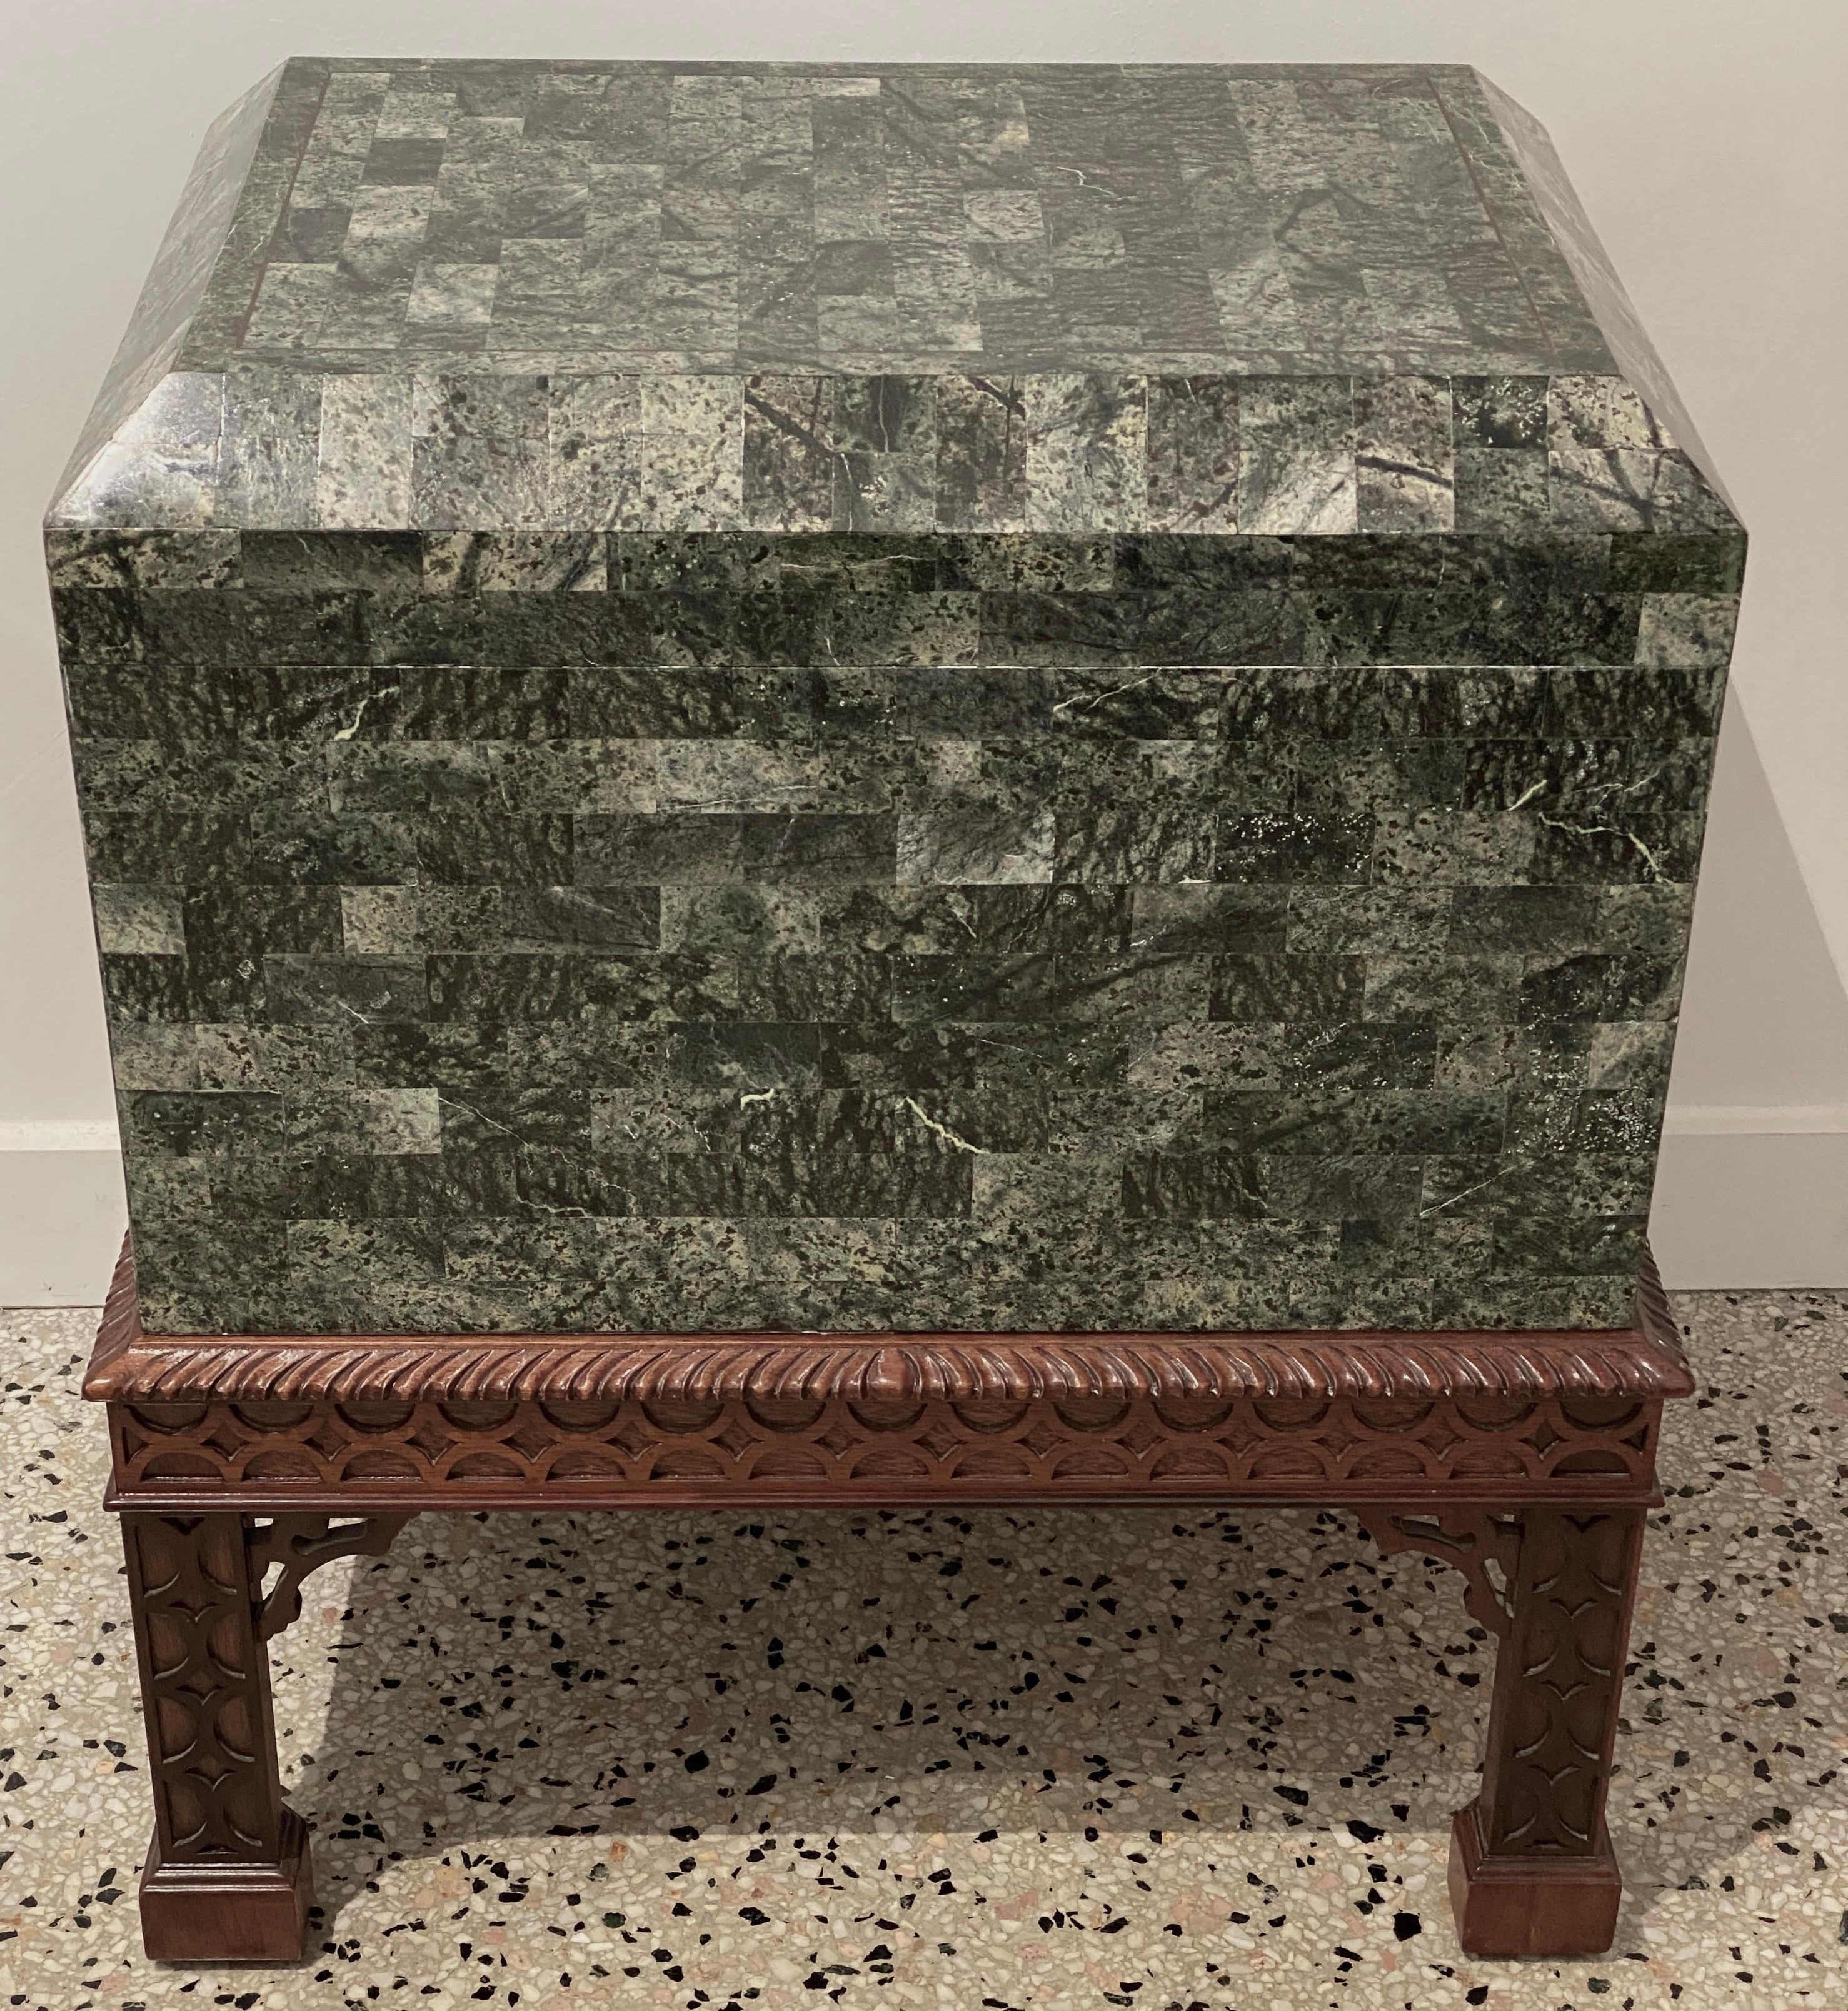 This stylish and chic chest on stand was created by Maitland Smith in the 1980s-1990s and is fabricated in tessellated marble and a hand-carved mahogany stand.

Note: Box dimensions are 13.25